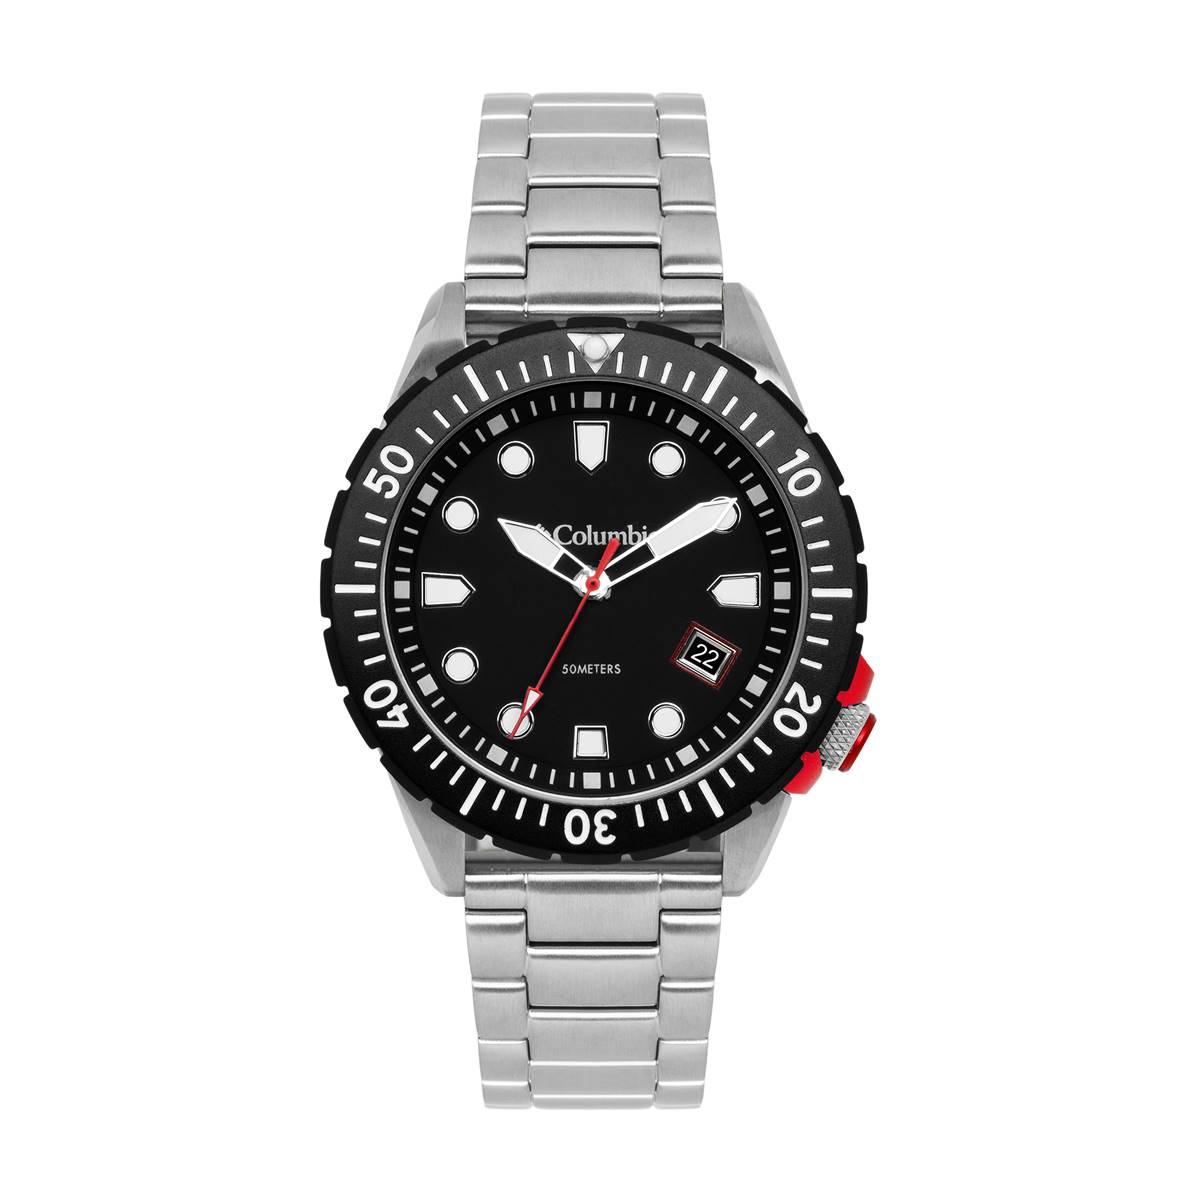 Columbia Pacific Outlander Stainless Steel Watch - CSC04-007